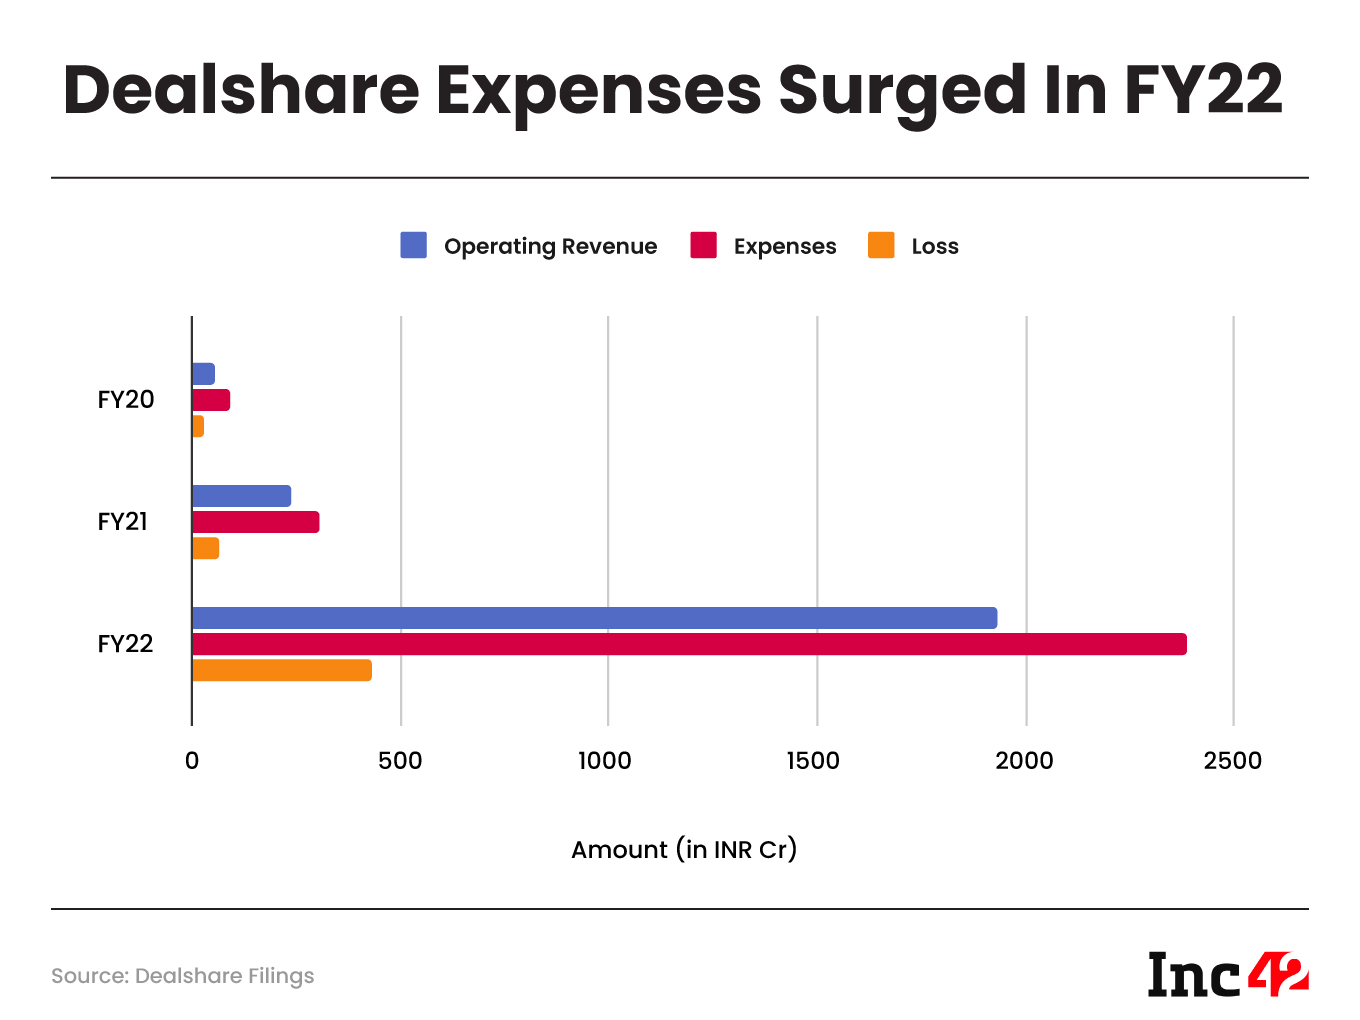 Dealshare losses surged in FY22. Will FY23 show a change? 